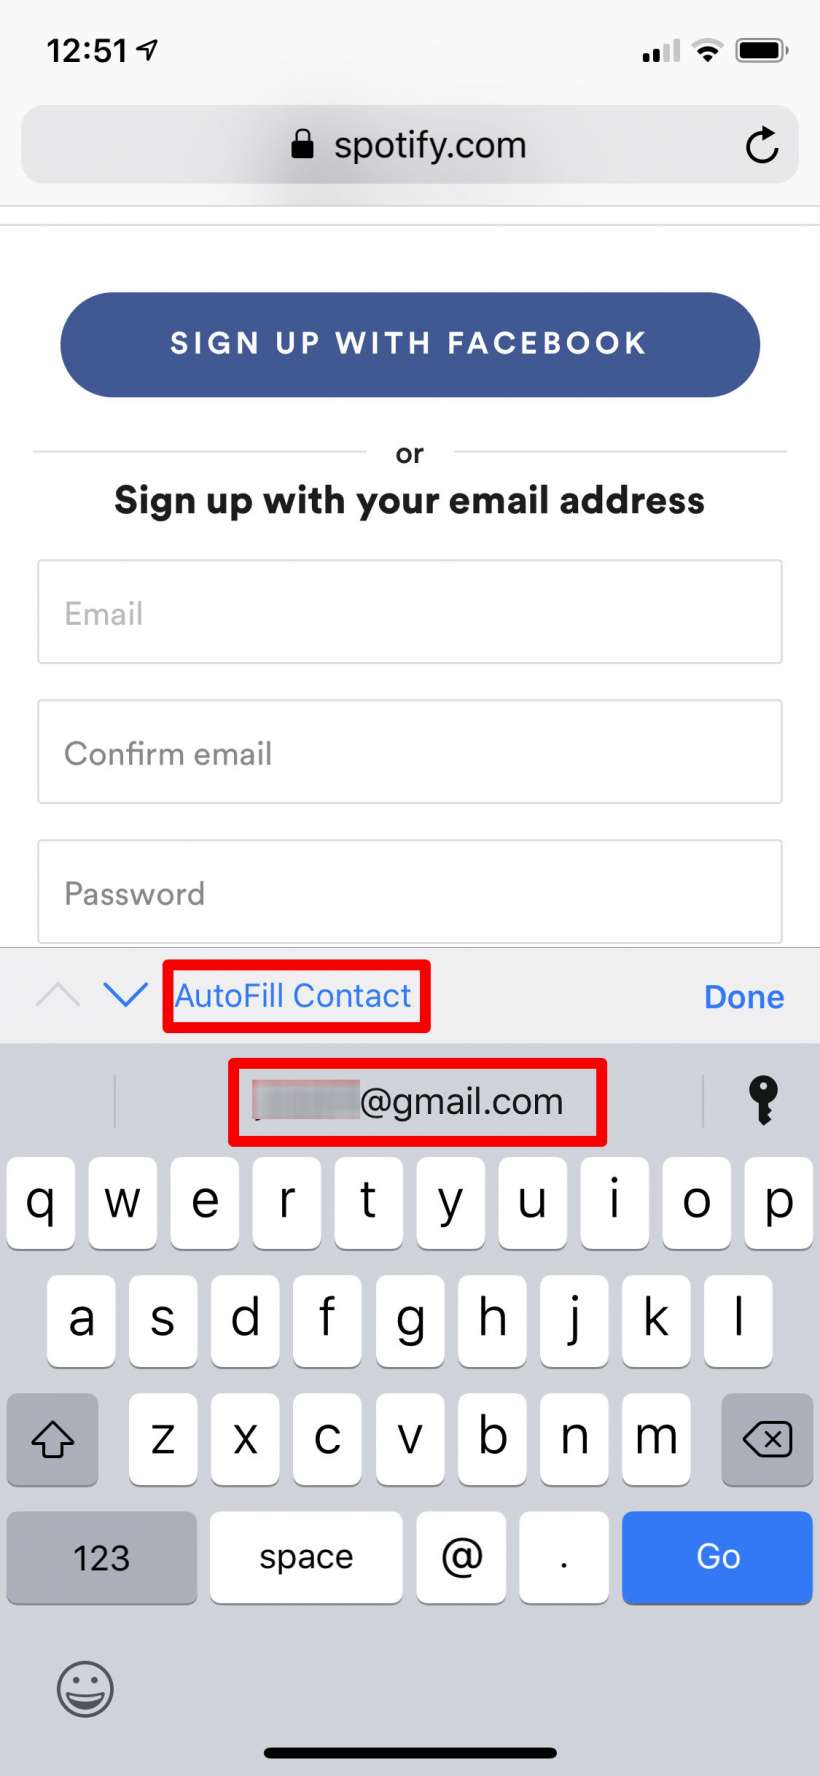 How to edit your personal information in Safari's autofill on iPhone and iPad.